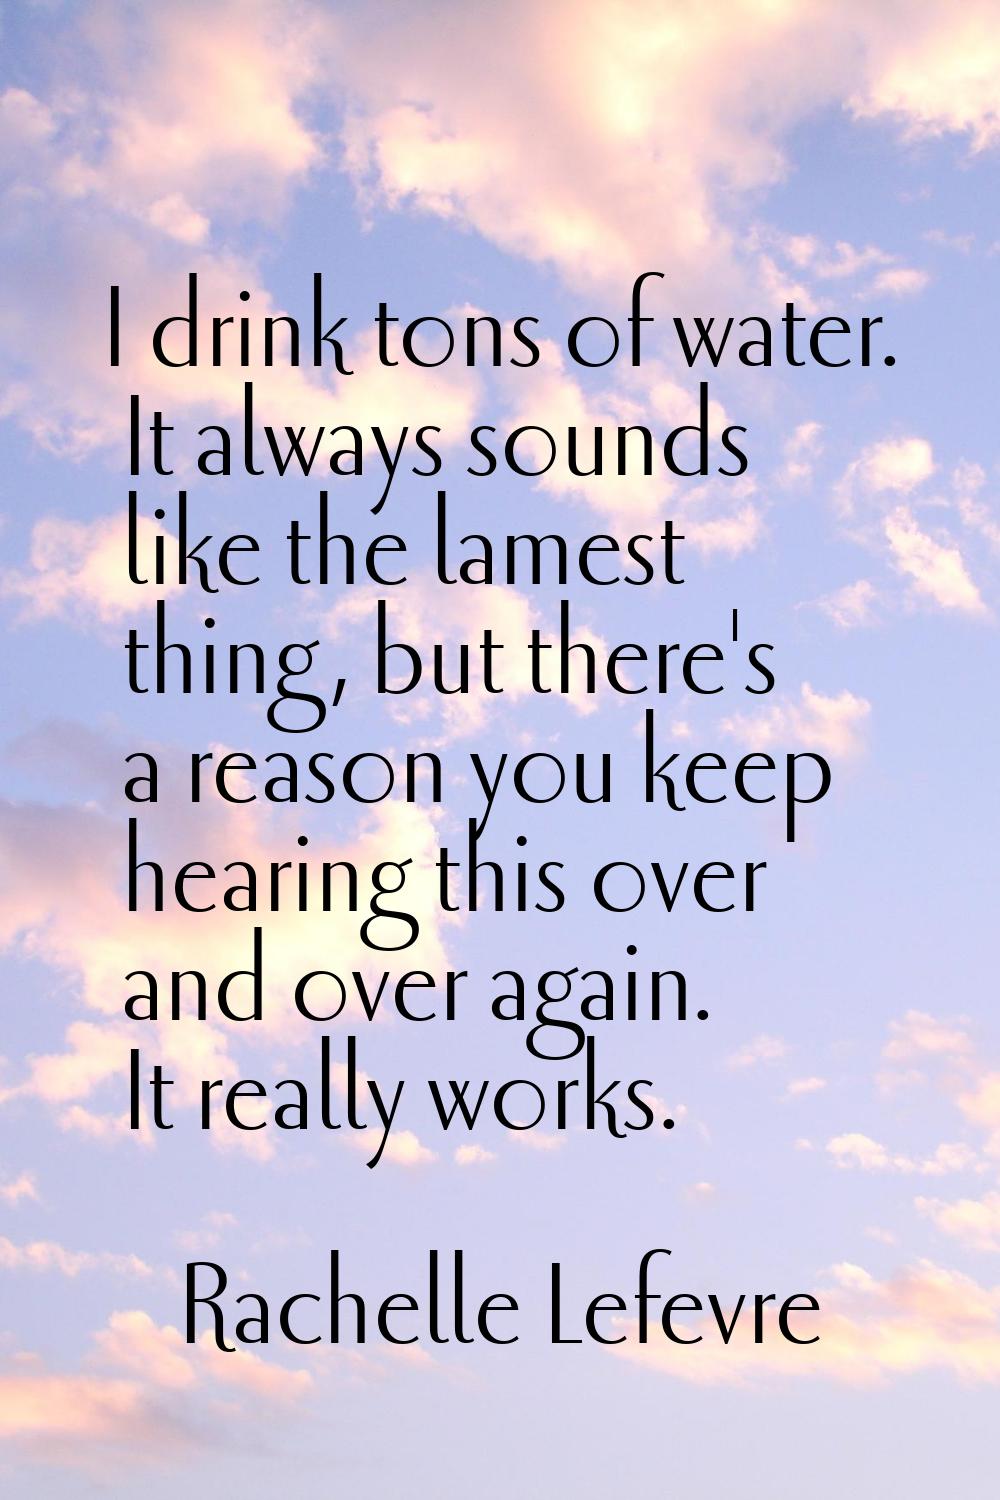 I drink tons of water. It always sounds like the lamest thing, but there's a reason you keep hearin